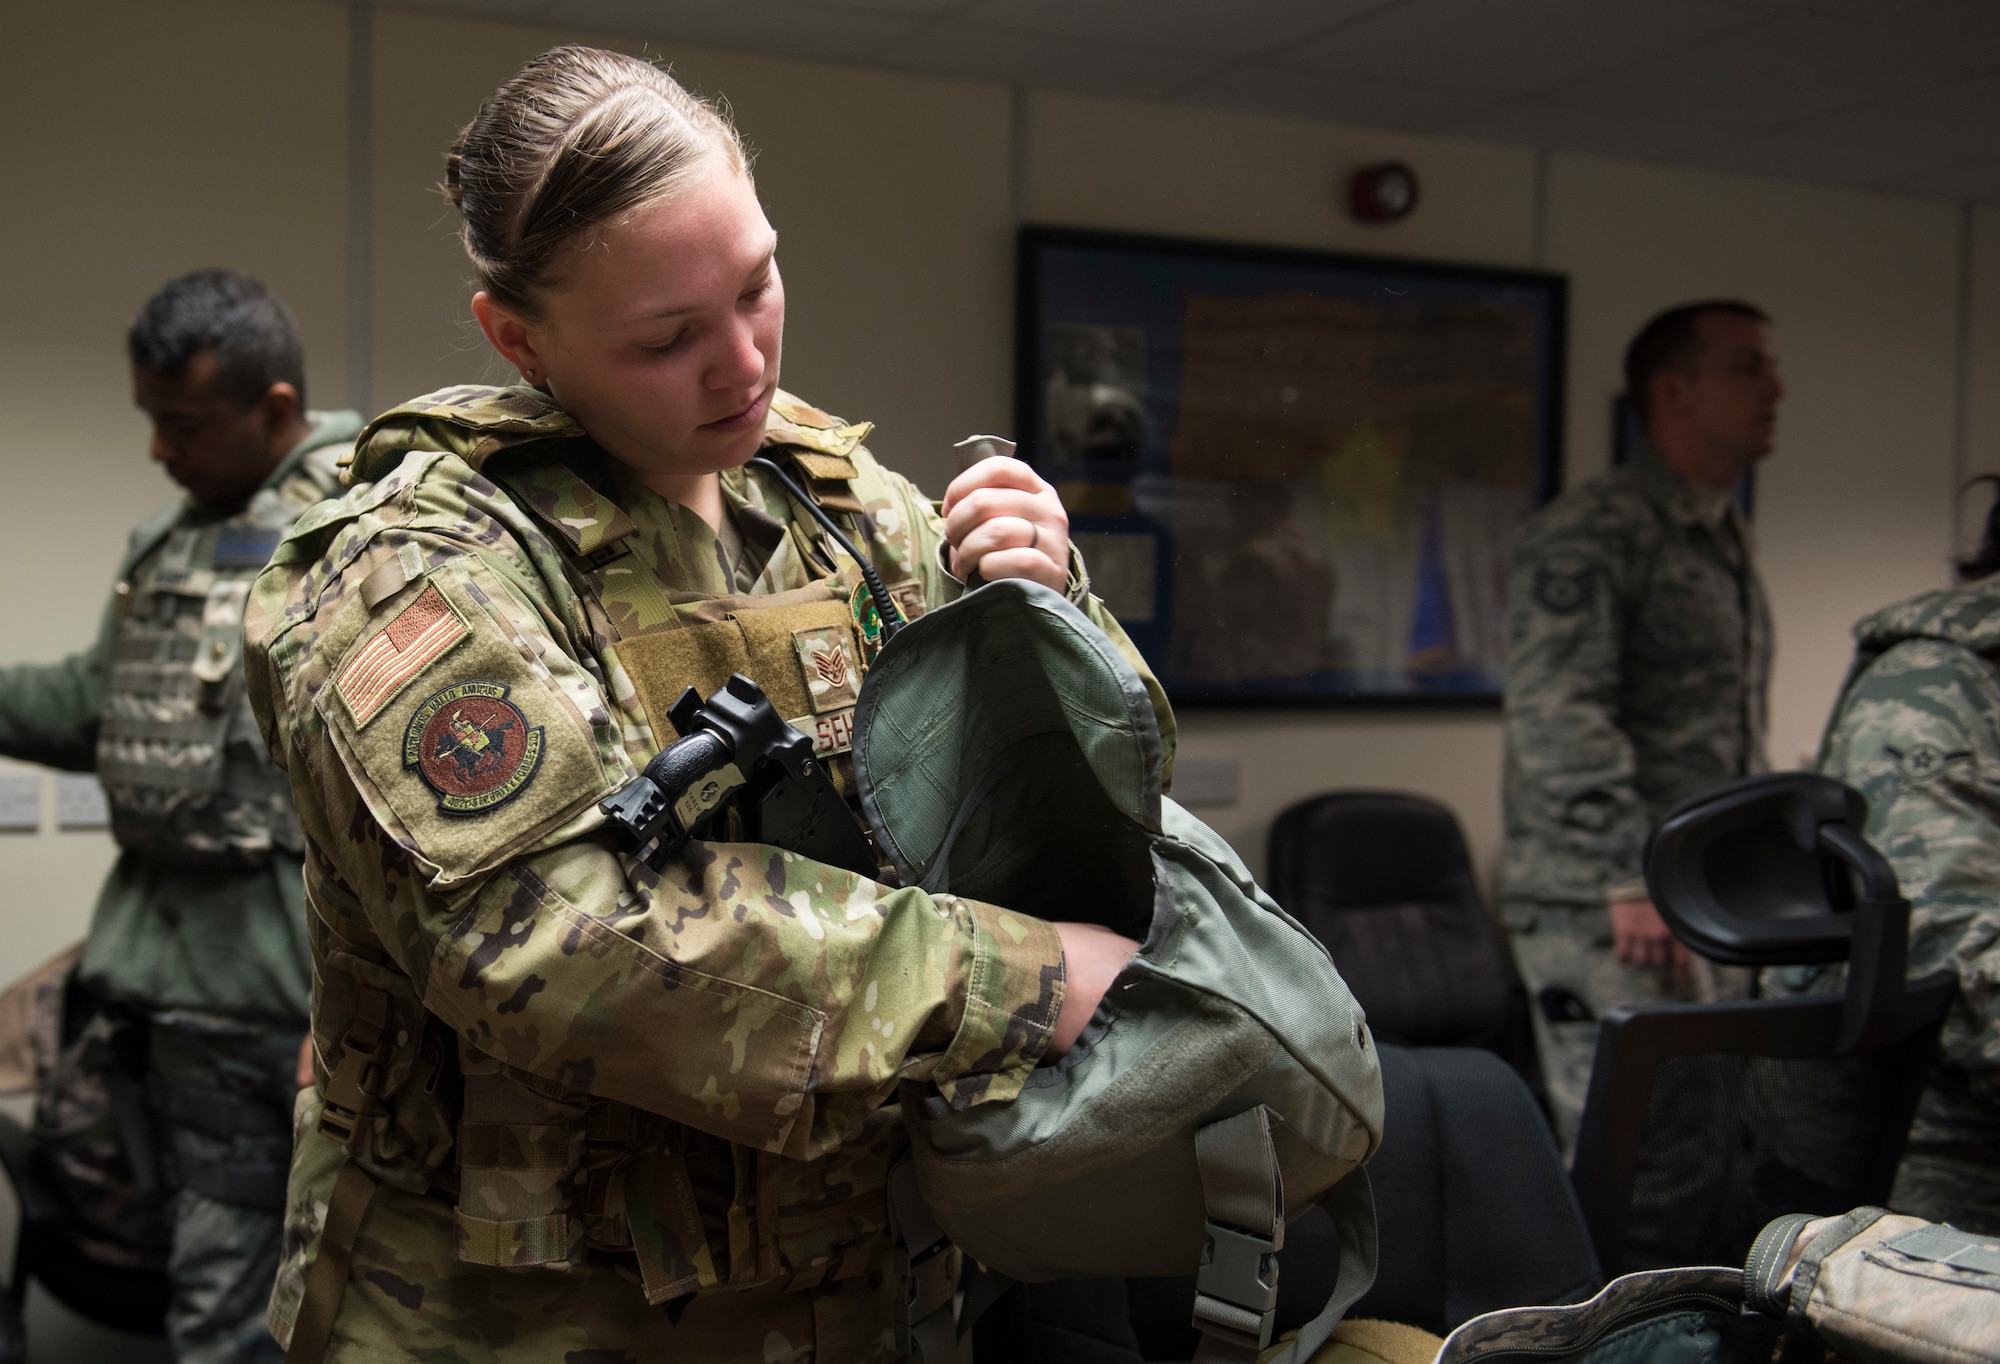 U.S. Air Force Staff Sgt. Nichole Sehle, 422nd Security Forces Squadron NCOIC of standardization and evaluations, locates required equipment during a recall exercise at RAF Croughton, England, November 21, 2019. Quarterly recall exercises are a form of readiness for defenders to always be prepared to respond at a moment’s notice. (U.S. Air Force photo by Airman 1st Class Jennifer Zima)